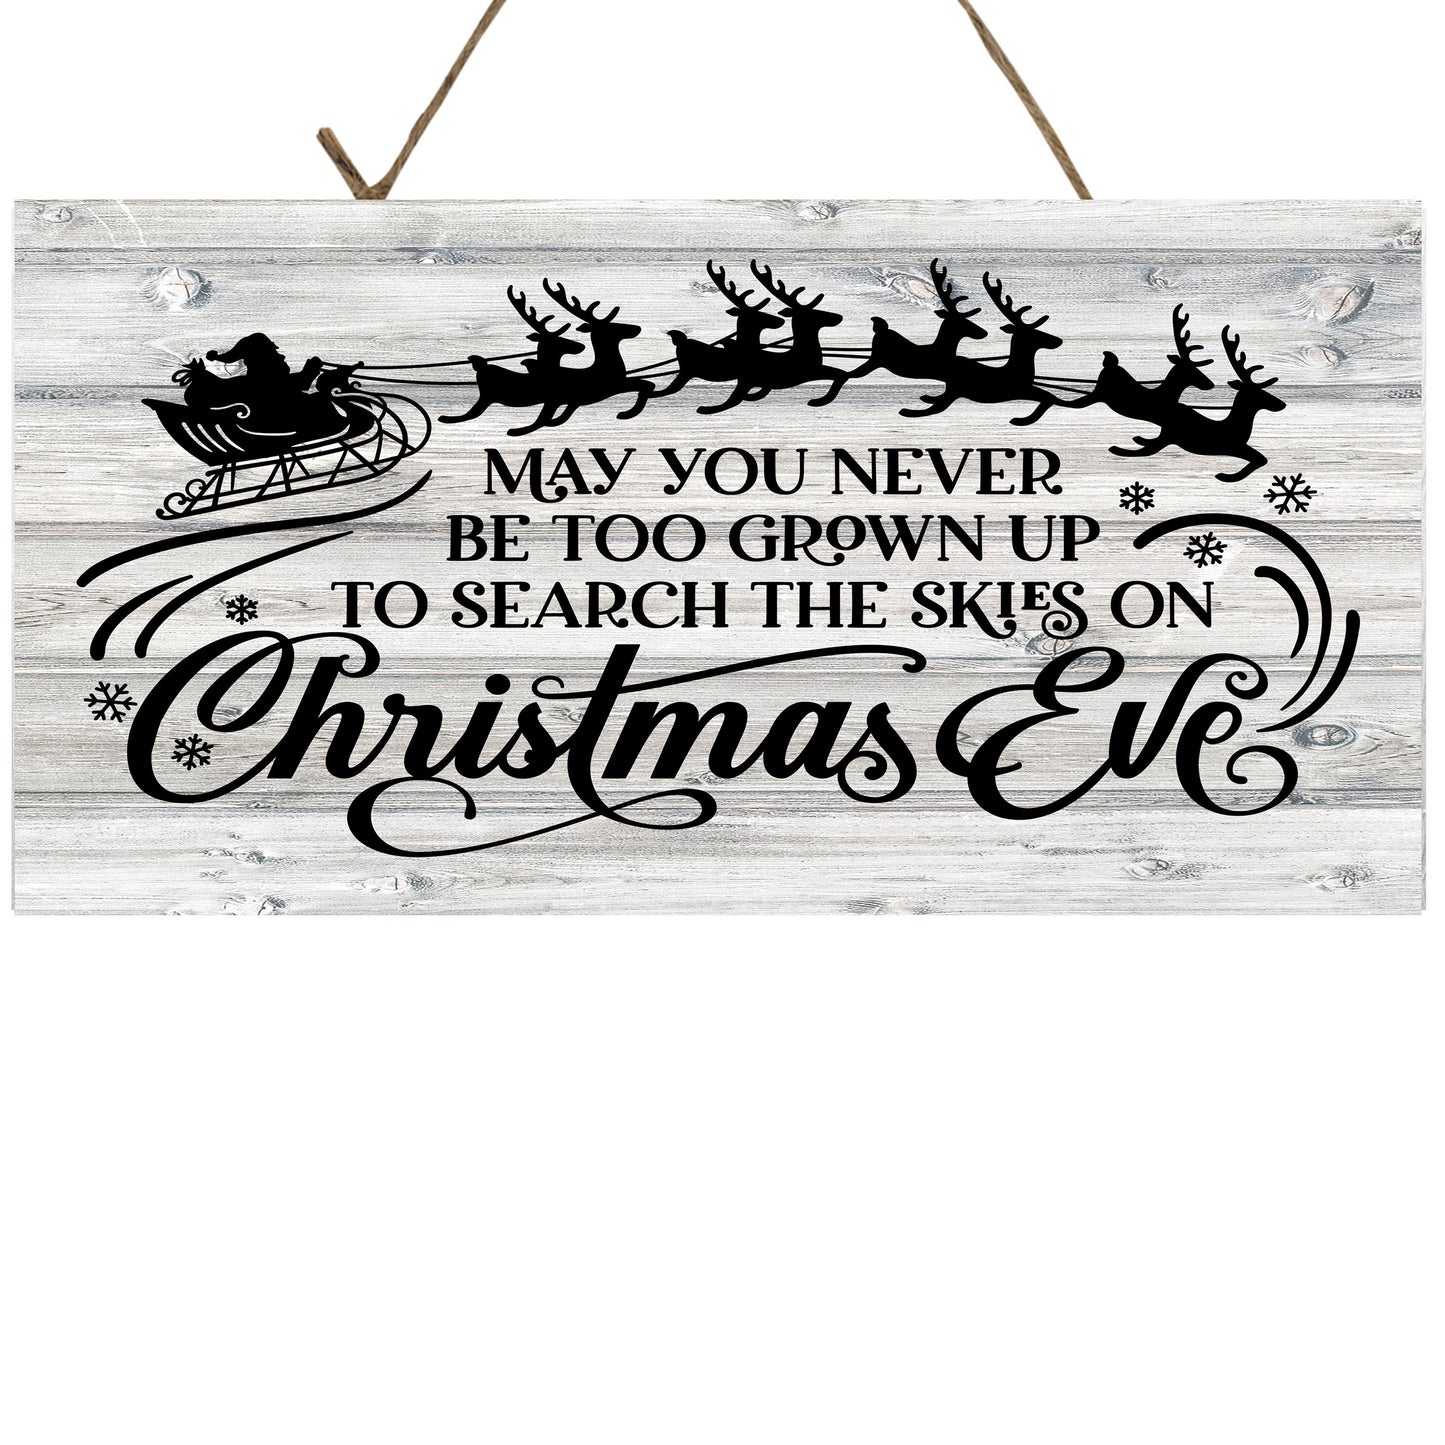 May You Never be Too Grown Up to Search the Skies on Christmas Eve Printed Handmade Wood Sign